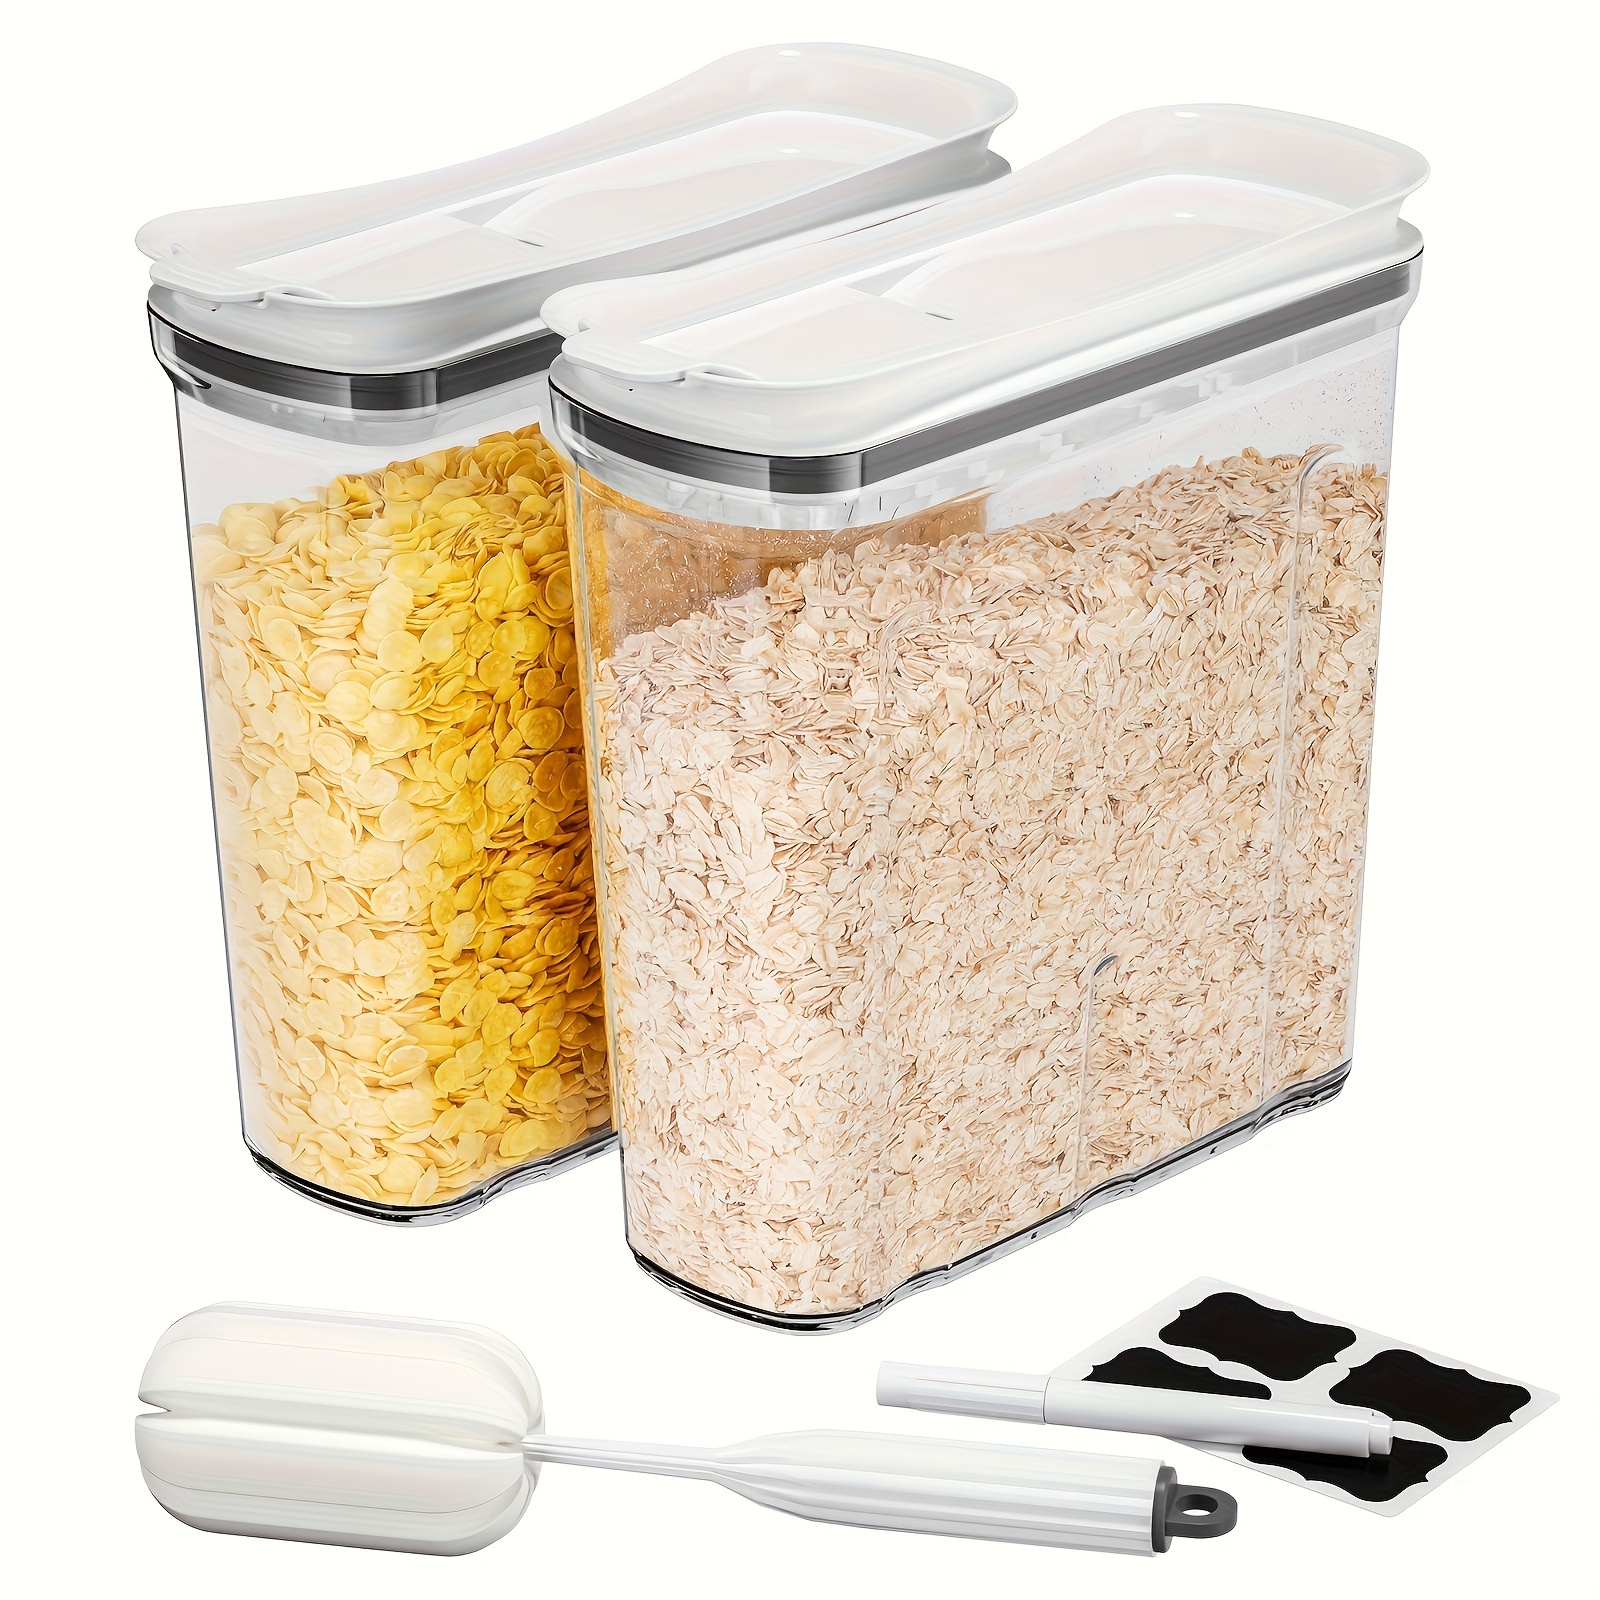 Cereal Containers Storage Set Large - Pack of 4 (4L,135.2 Oz), Airtight  Food Storage Containers for Kitchen & Pantry Organization, Cereal Storage